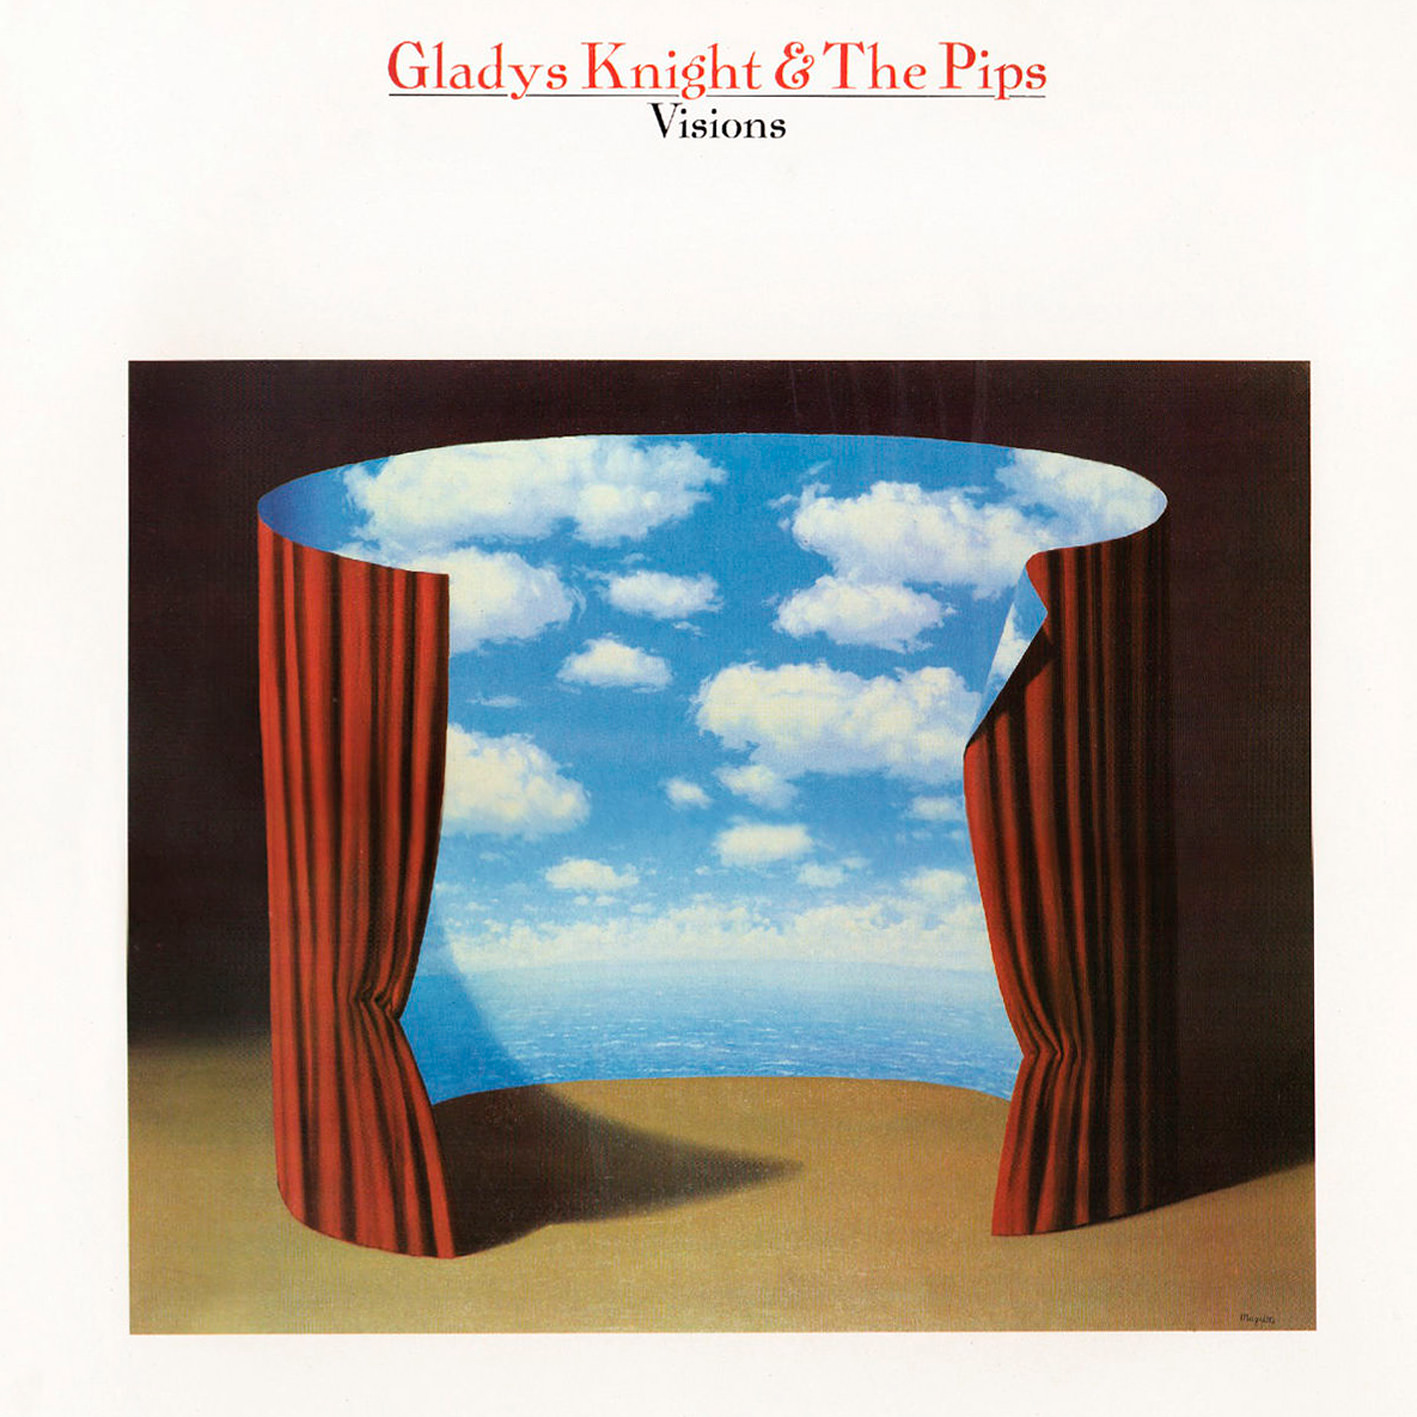 Gladys Knight & The Pips – Visions (1983/2015) {Expanded Edition 2014} [HDTracks FLAC 24bit/96kHz]